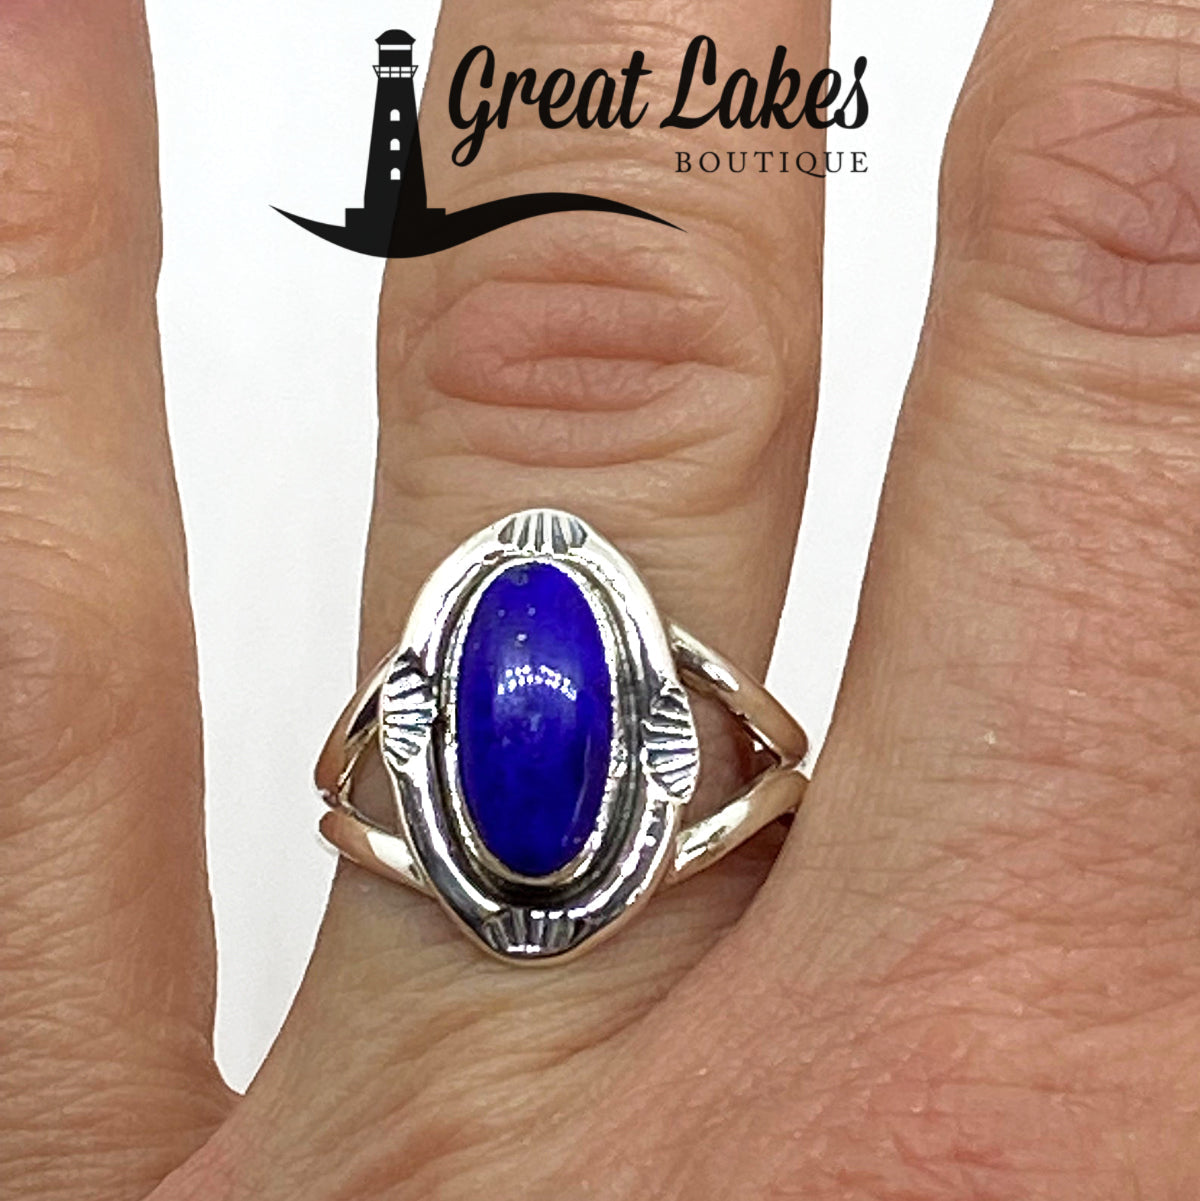 Great Lakes Boutique Silver and Lapis Lazuli Ring